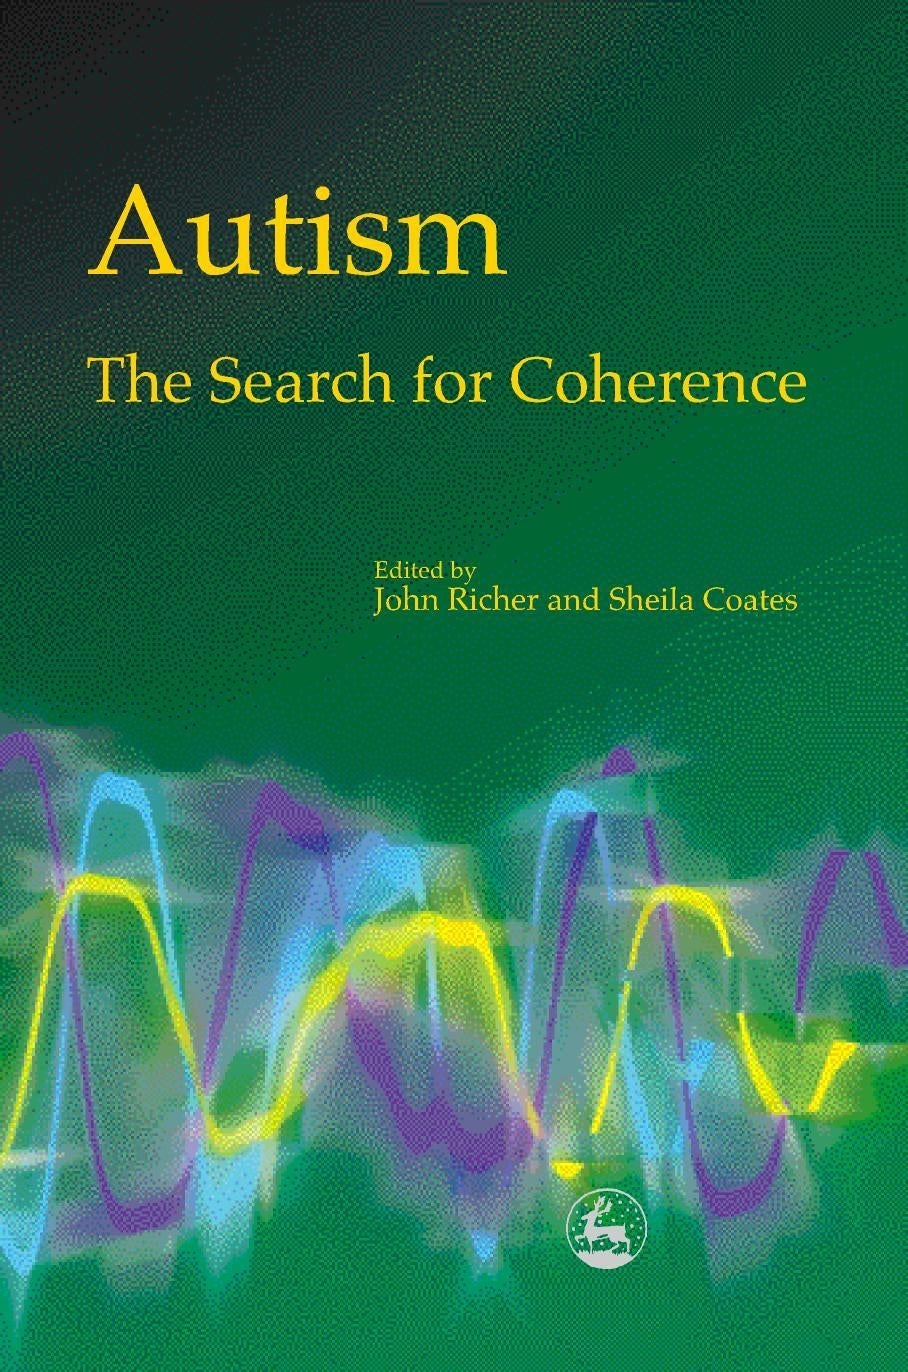 Autism - The Search for Coherence by John Richer, Sheila Coates